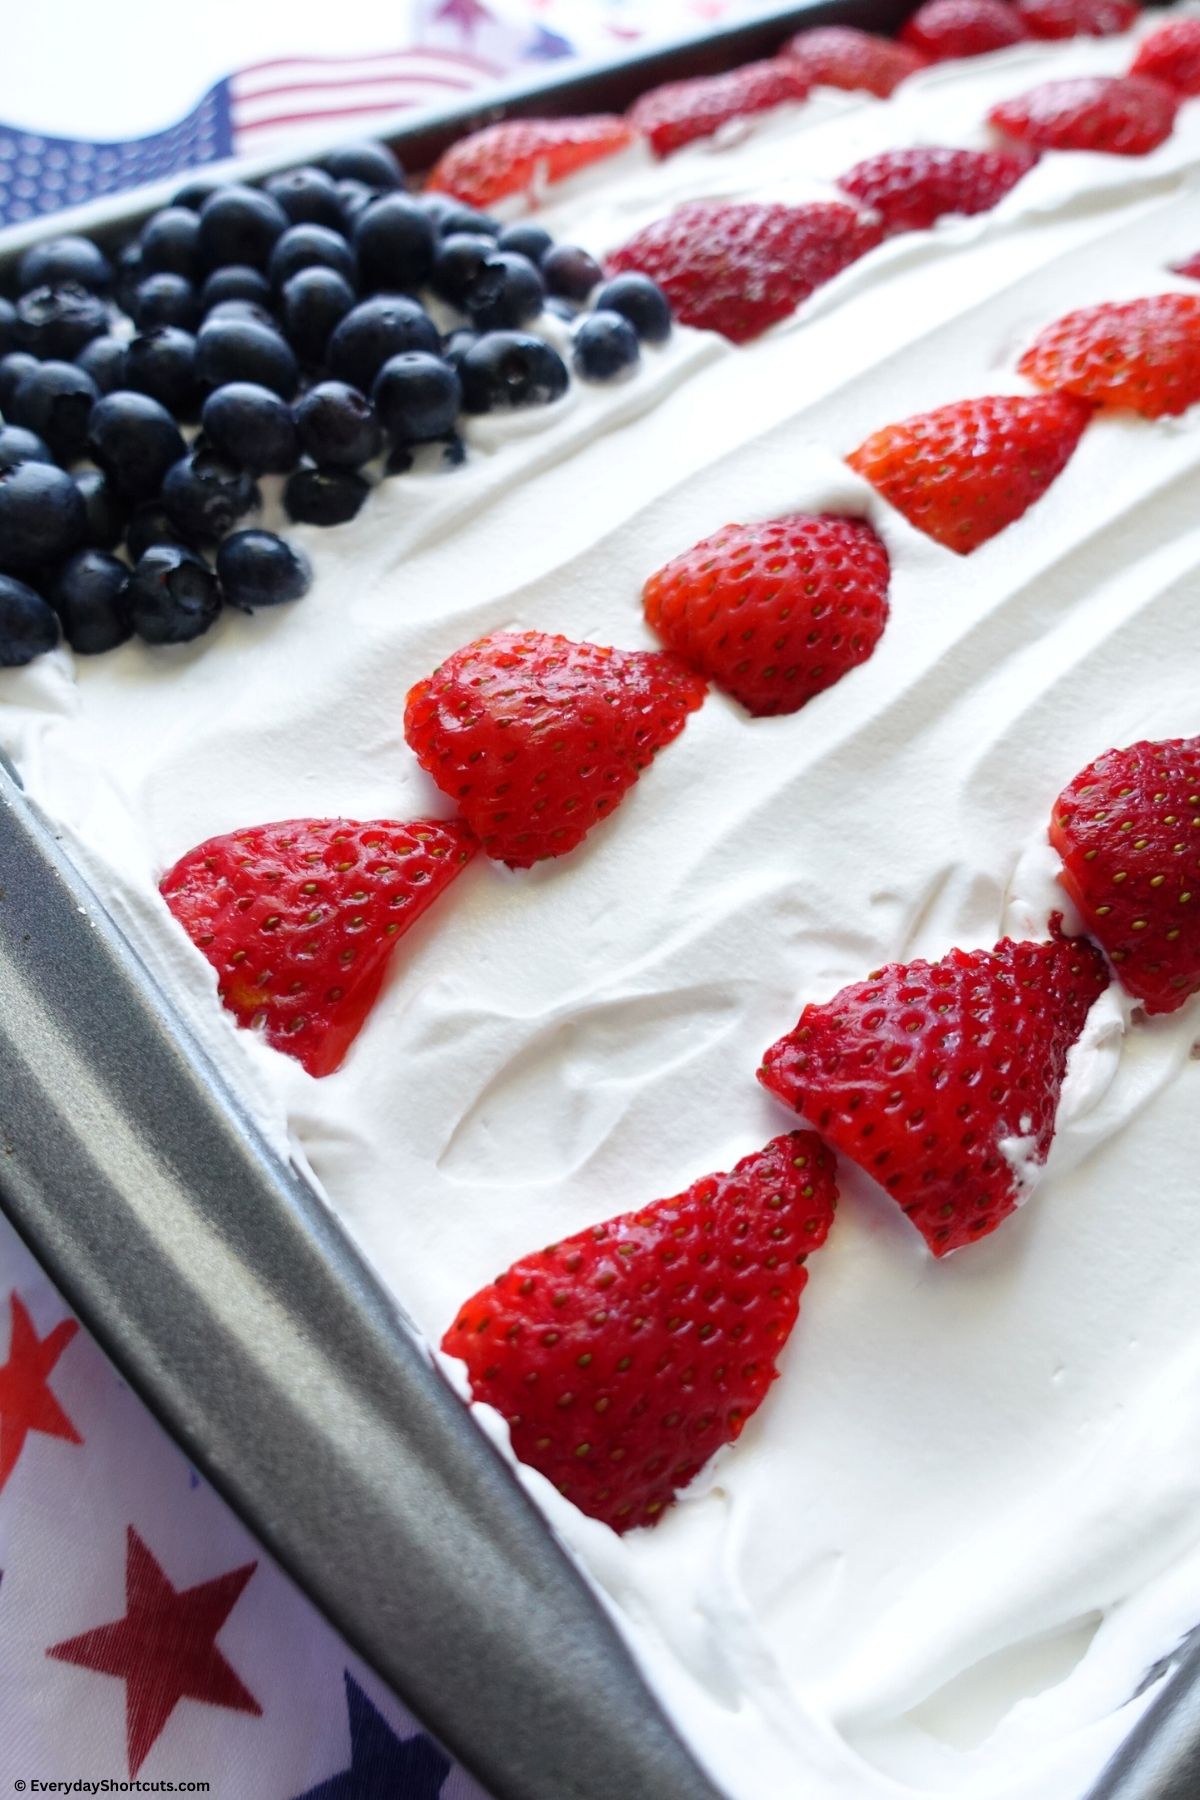 blueberries and strawberries flag cake